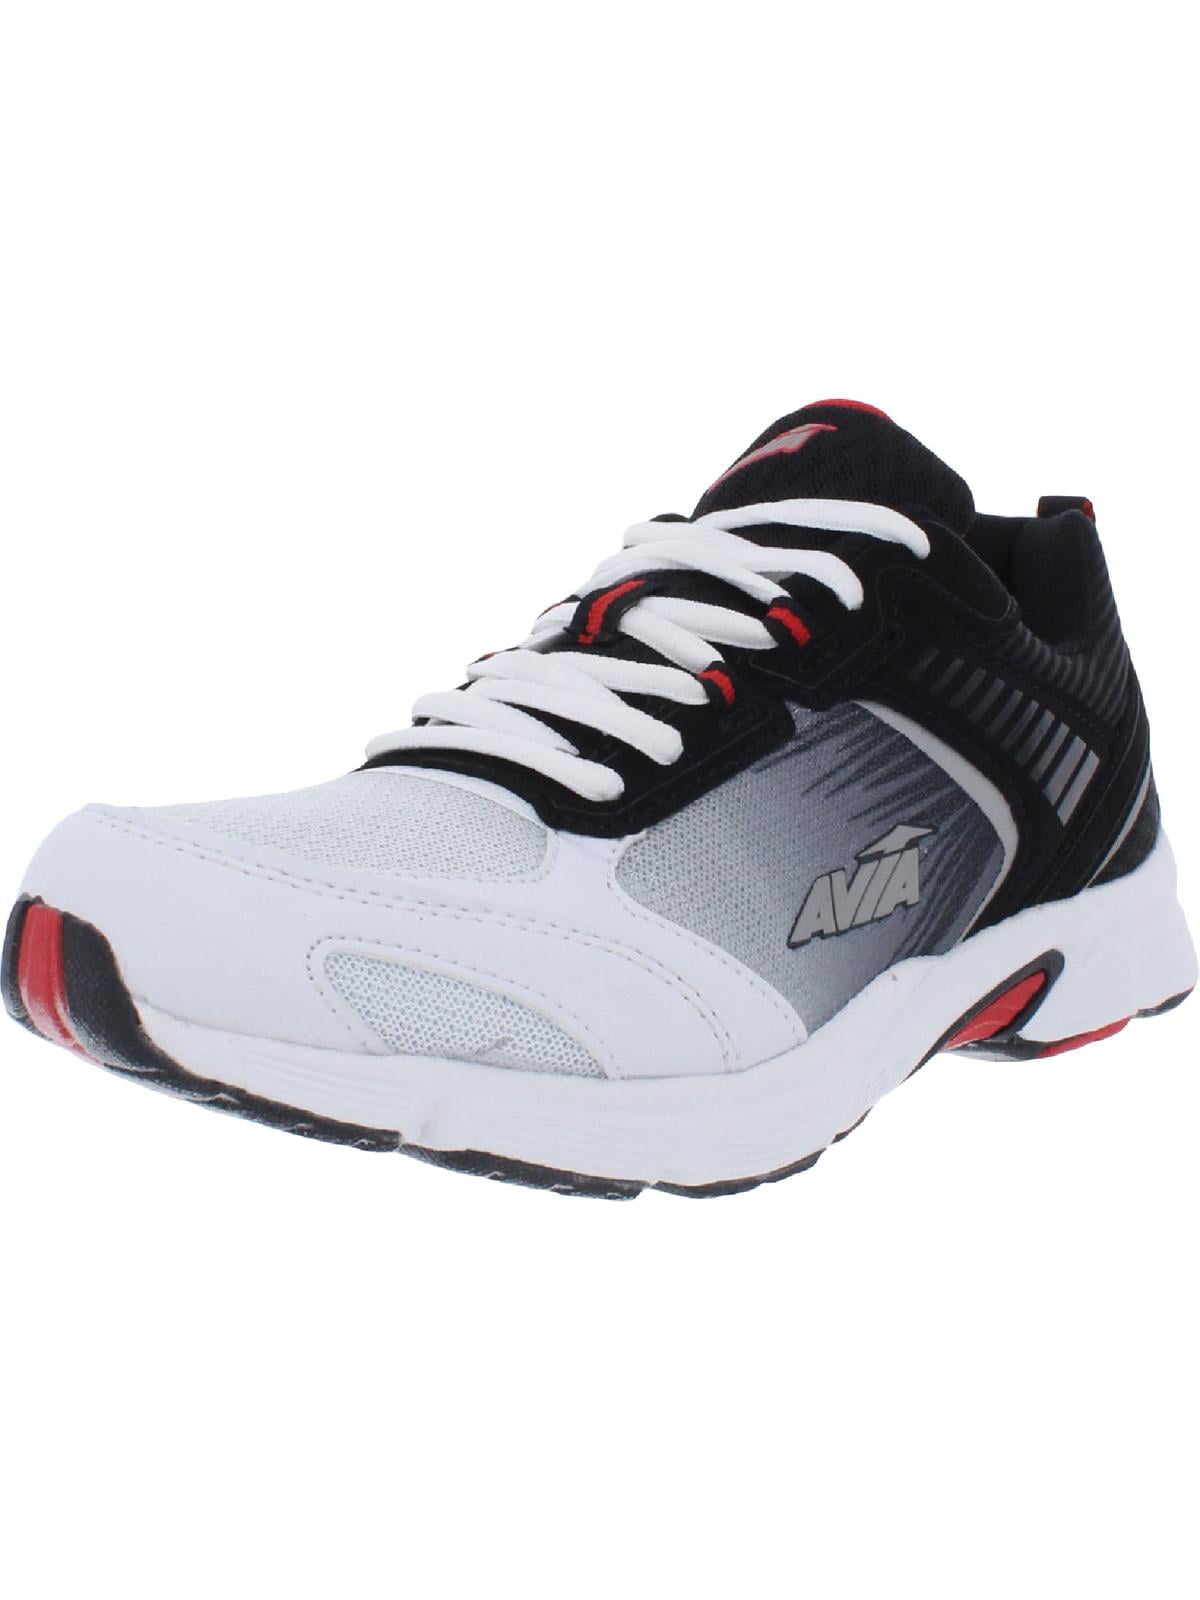 Mens Outdoor Running Sports Gym Fitness Non-slip Casual Fashion Sneakers Shoes B